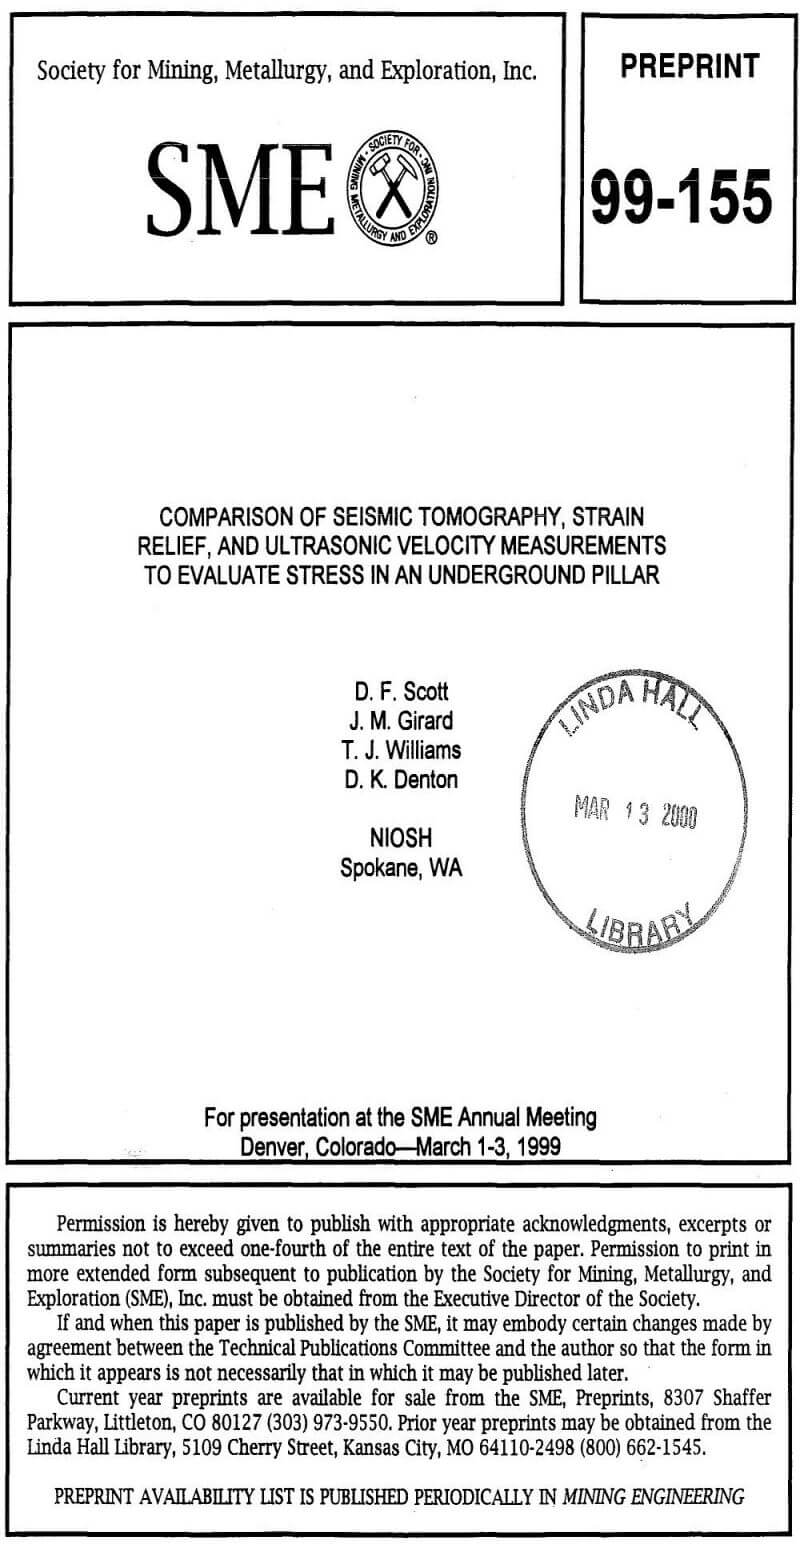 comparison of seismic tomography, strain relief, and ultrasonic velocity measurements to evaluate stress in an underground pillar